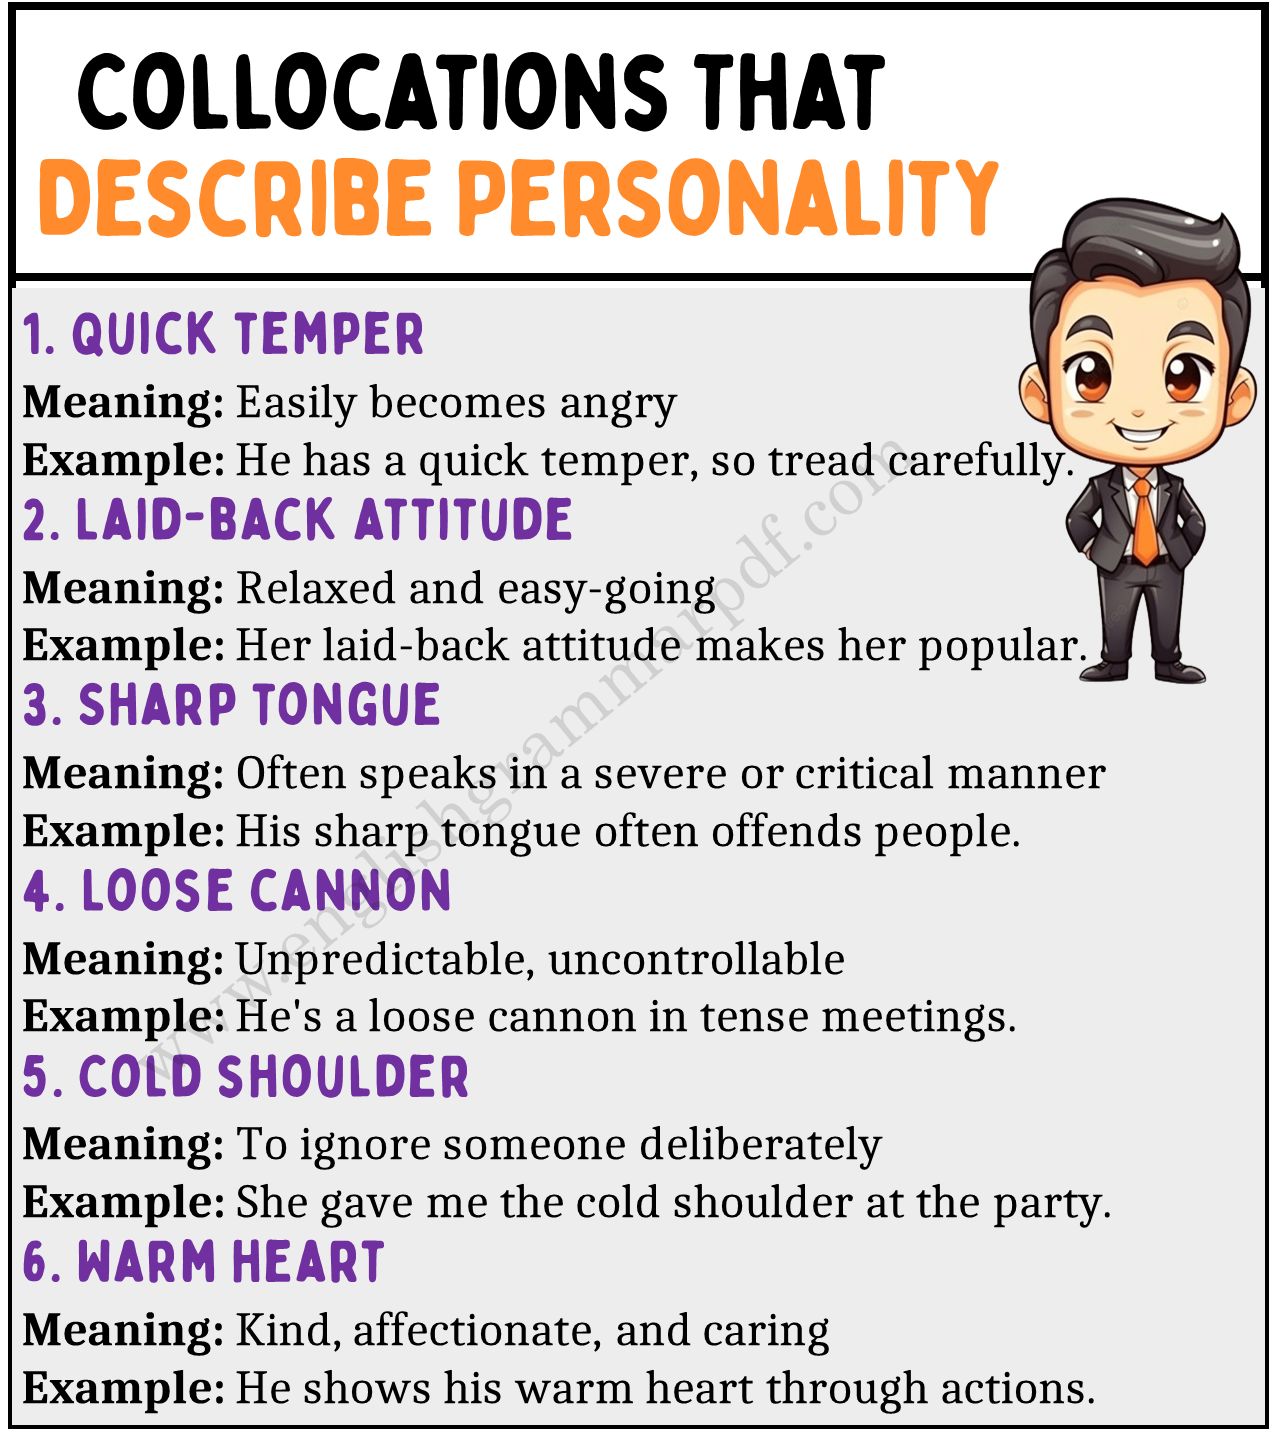 Collocations that Describe Personality